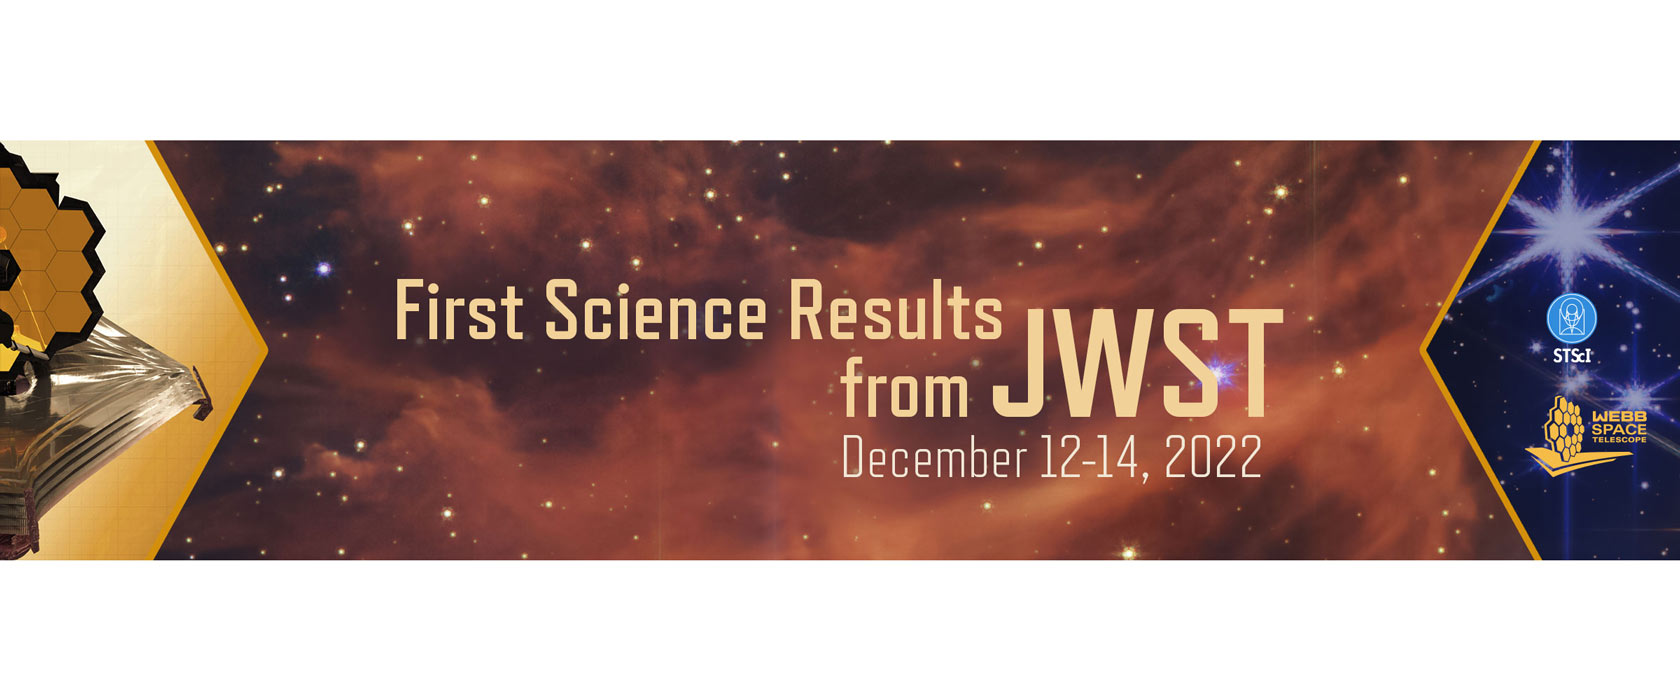 1st Science Results from JWST